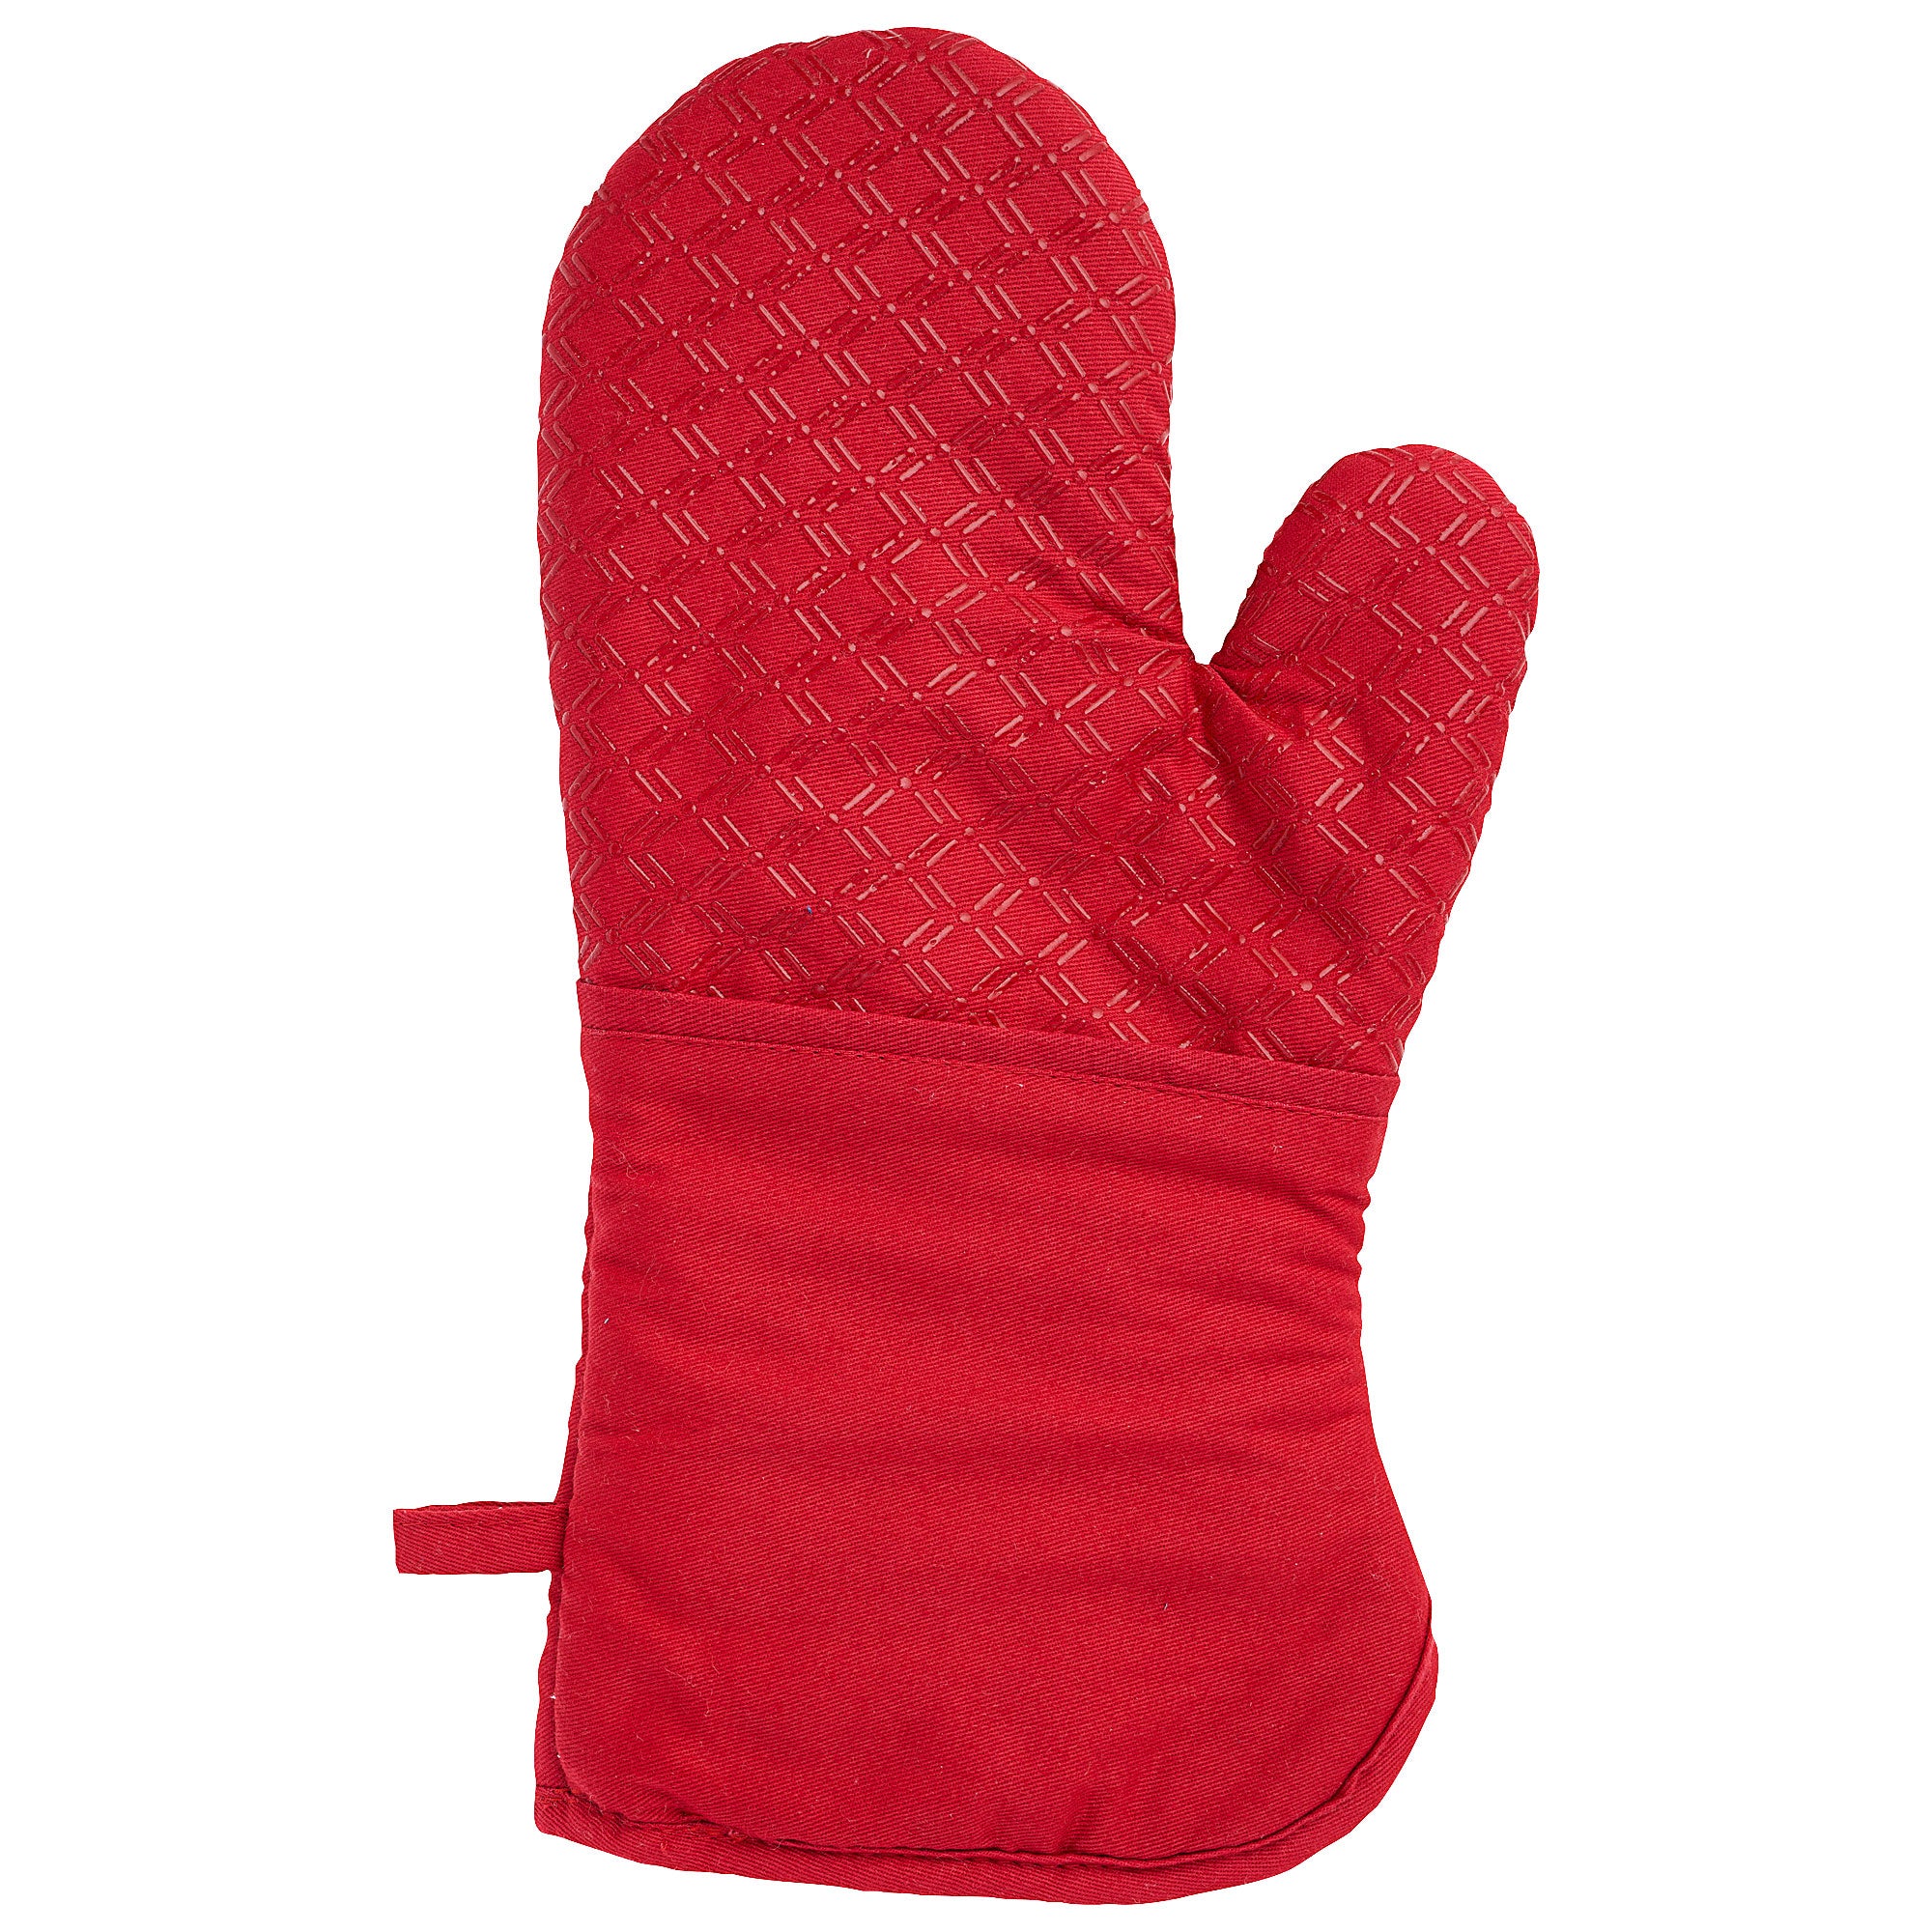 Silicon Oven Mitt Assorted | The Reject Shop